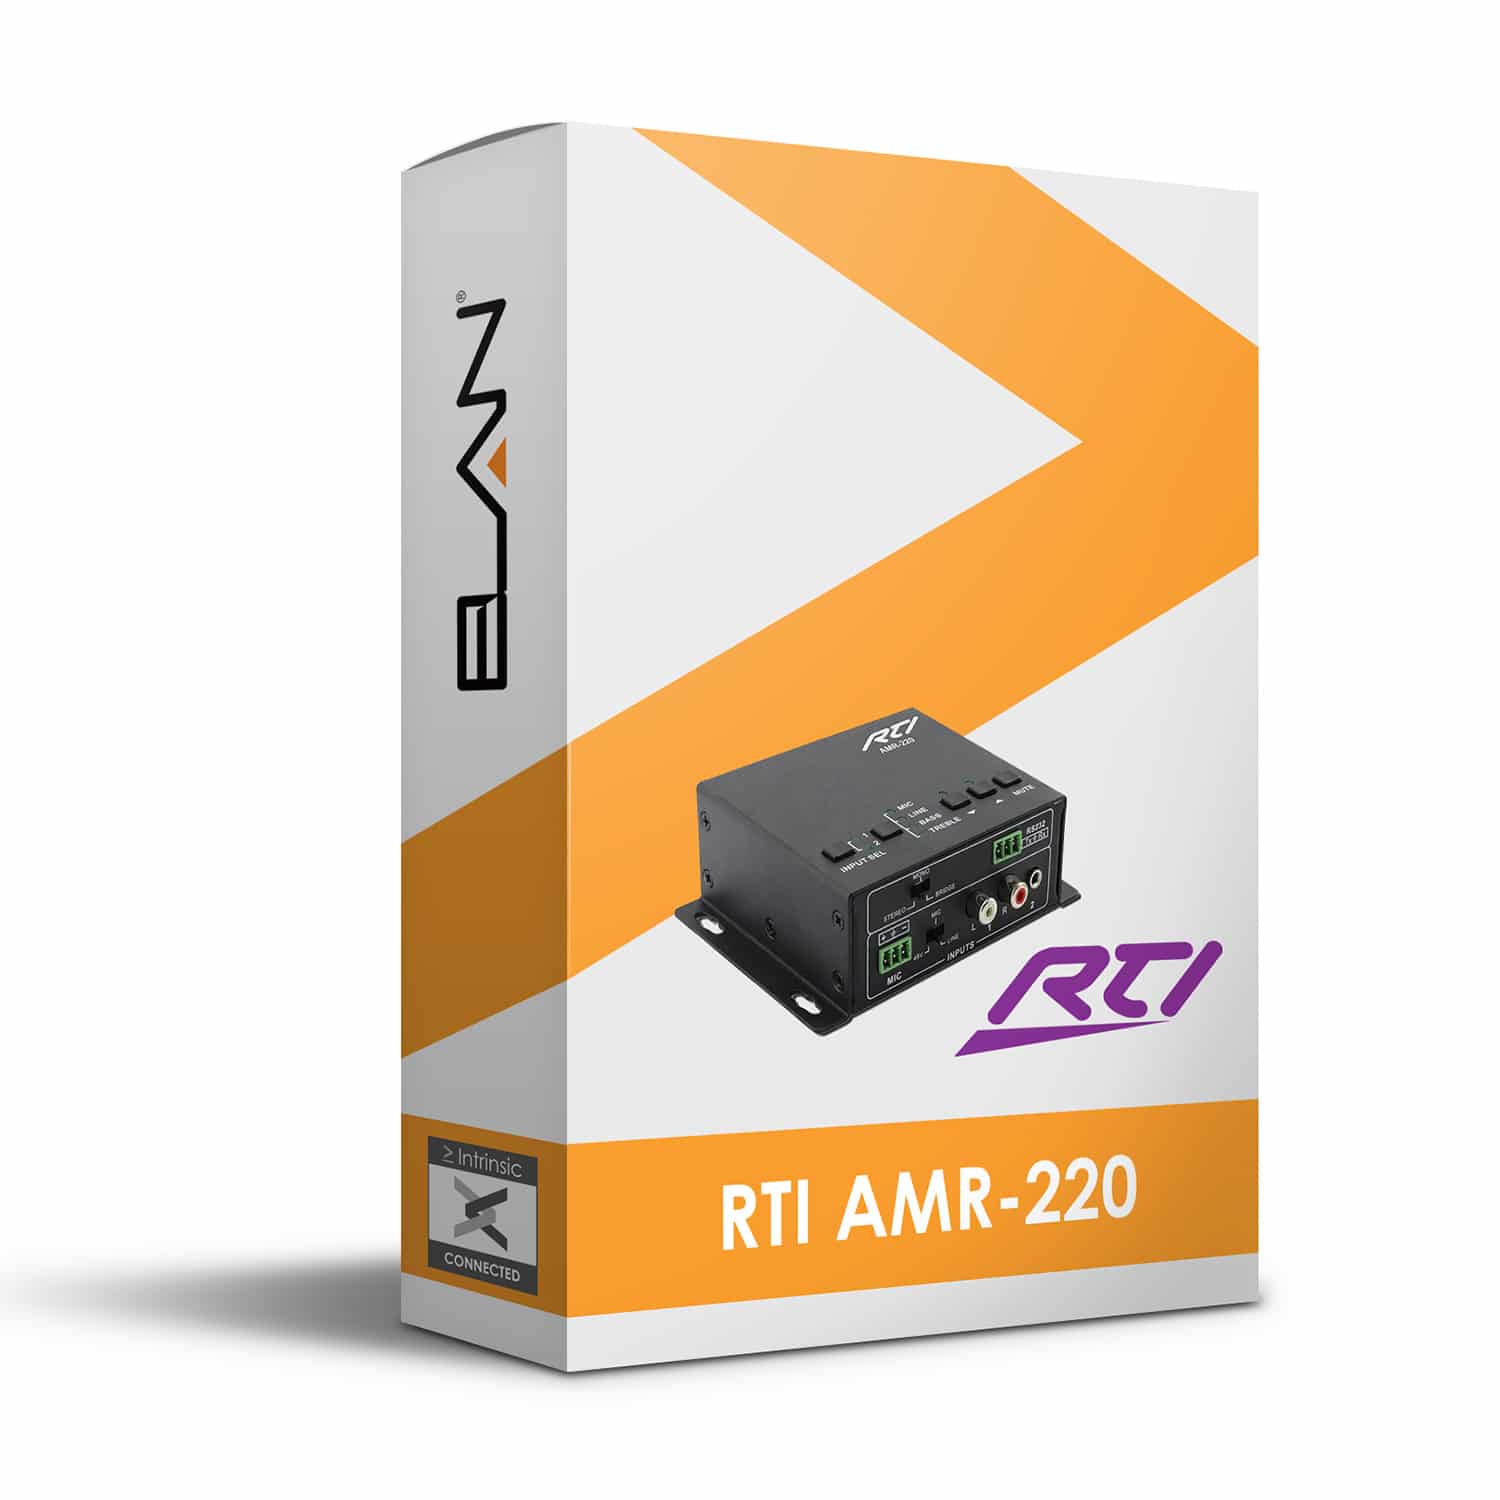 rti amr-220 rs232 driver for elan